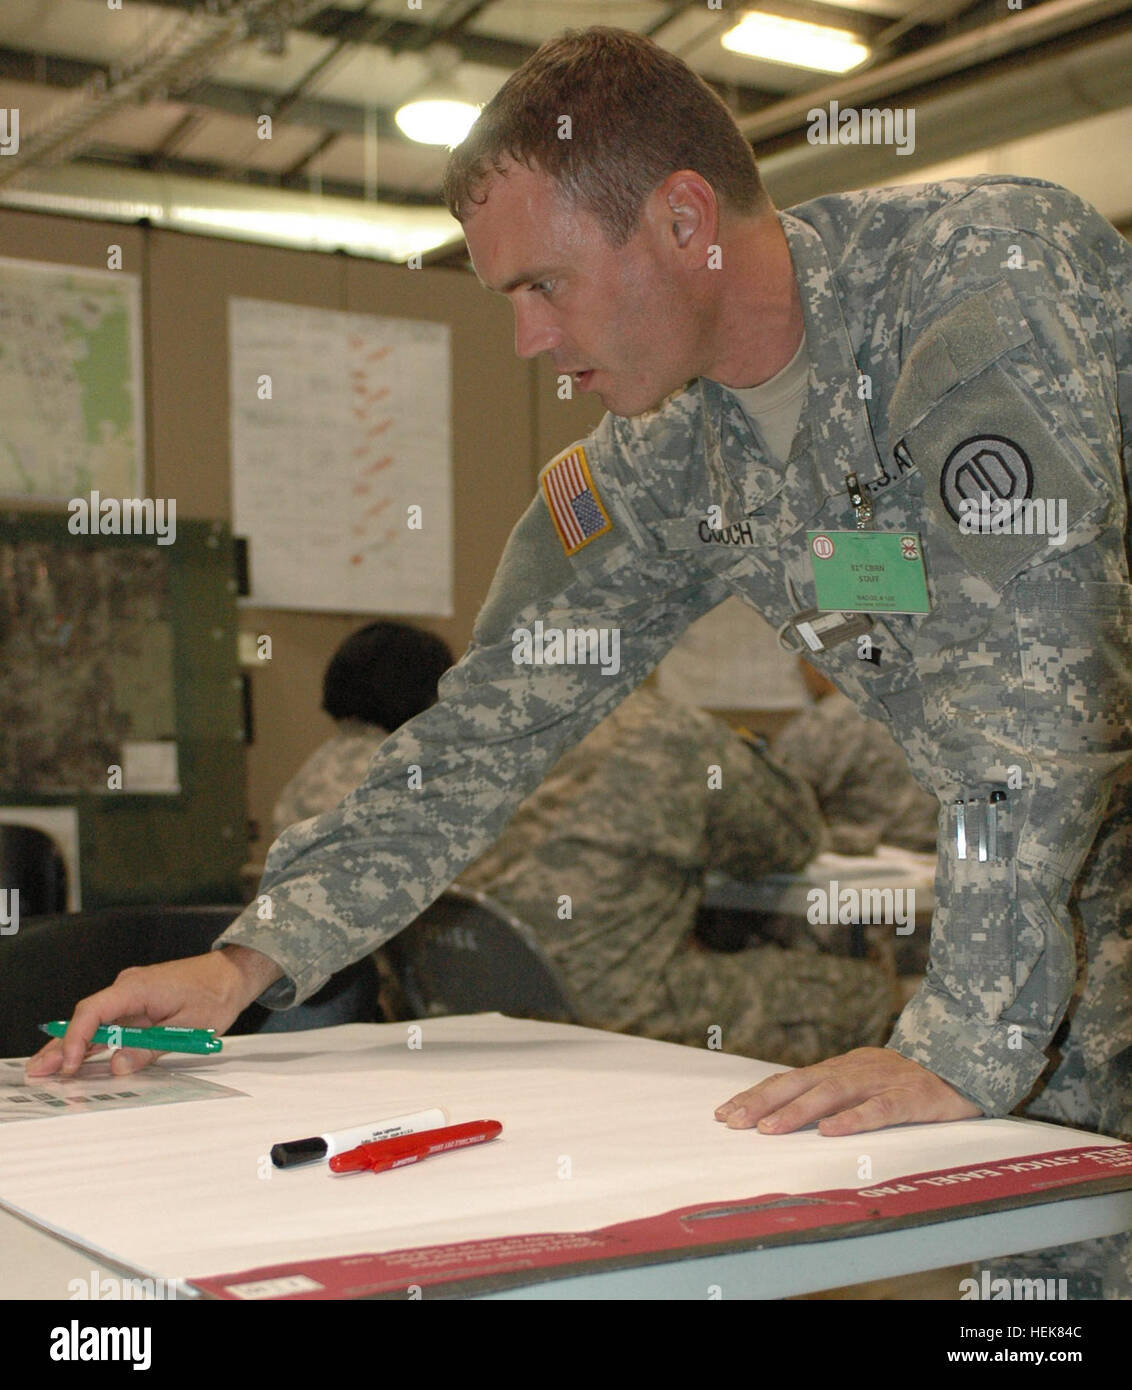 Spc. Kevin Couch, a combat medic of the Brigade Surgeon cell, HHD 31st  Chemical Brigade, prepares a chart to display medical information during  the Vibrant Response 13 exercise around the beginning of